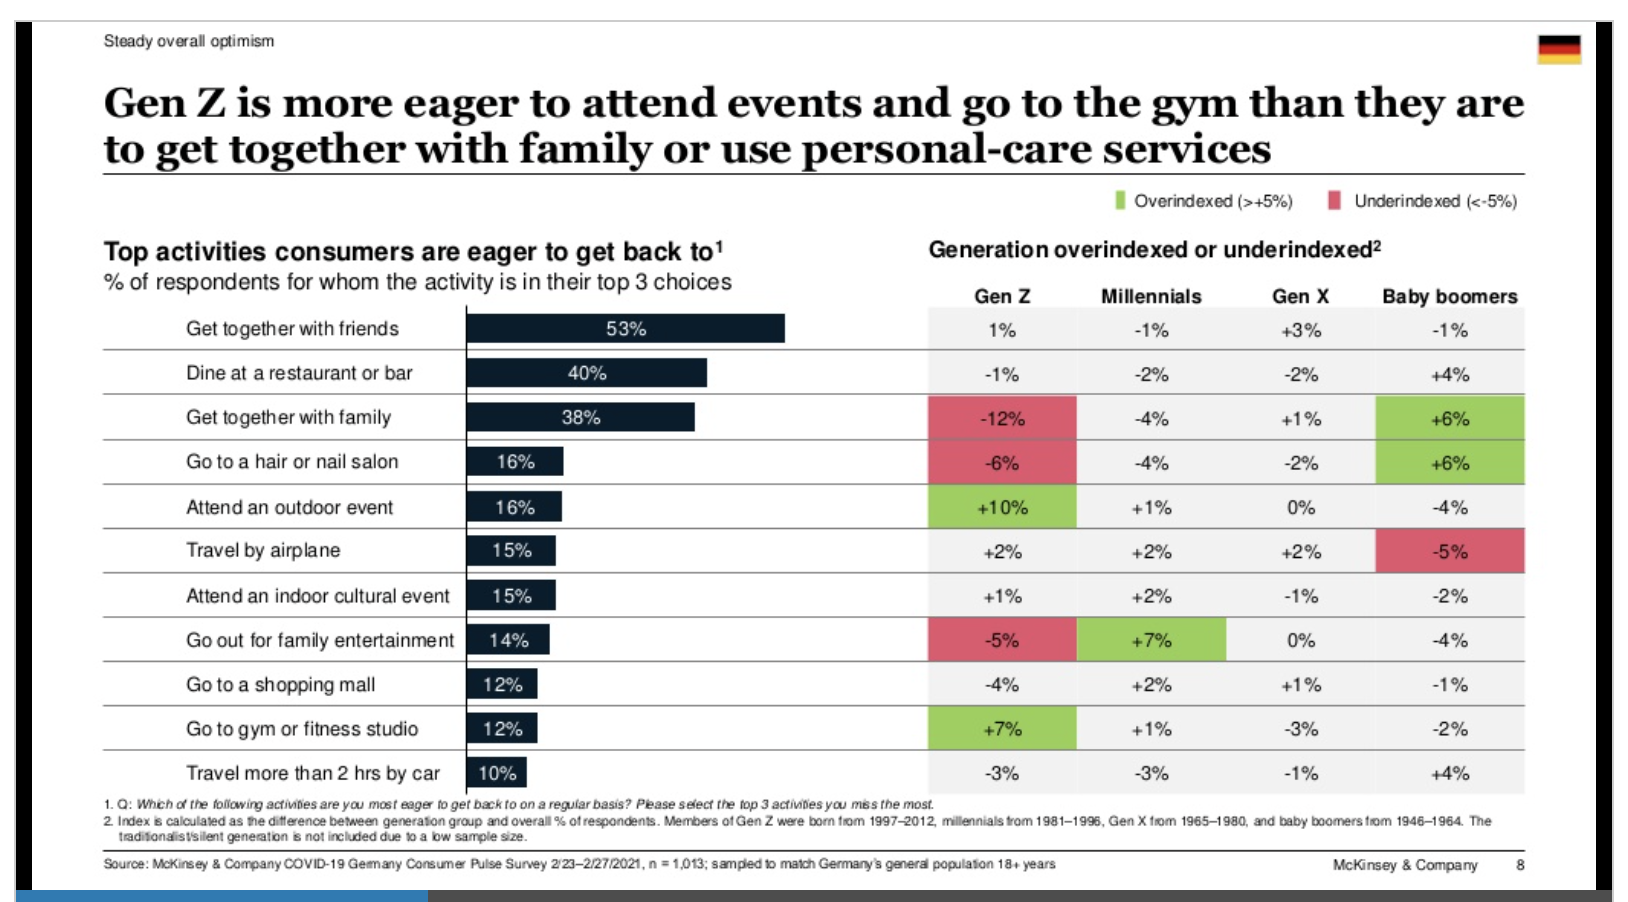 Gen Z is more eager to attend events and go to the gym that to get together with family or use personal-care services